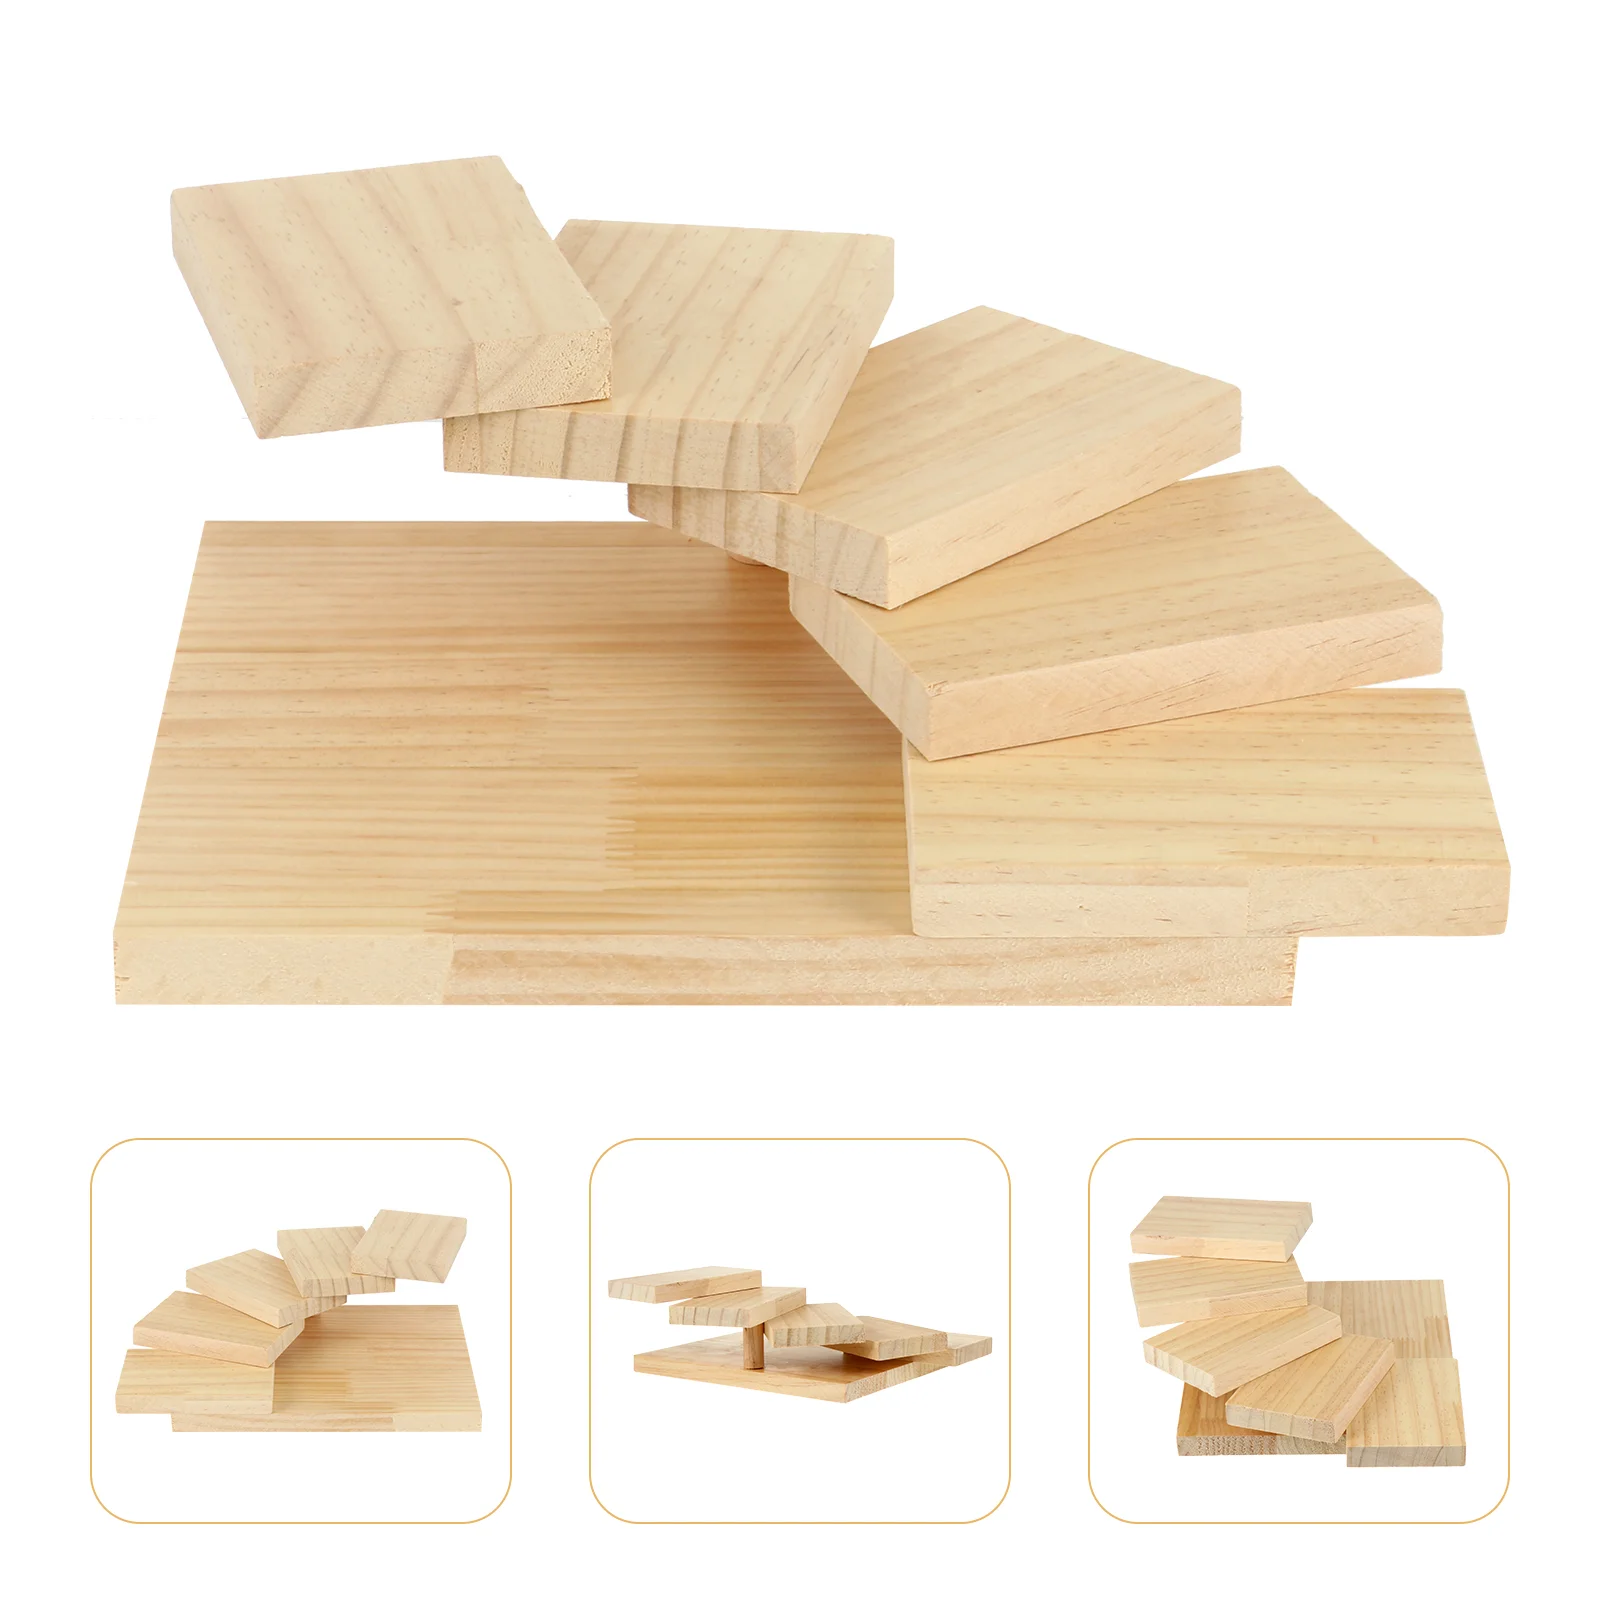 

Wooden Board Sashimi Display Stand Dinnerware Serving Tray Charcuterie Wood Cheese Food Tray Set For Dish Platter Dessert Boards